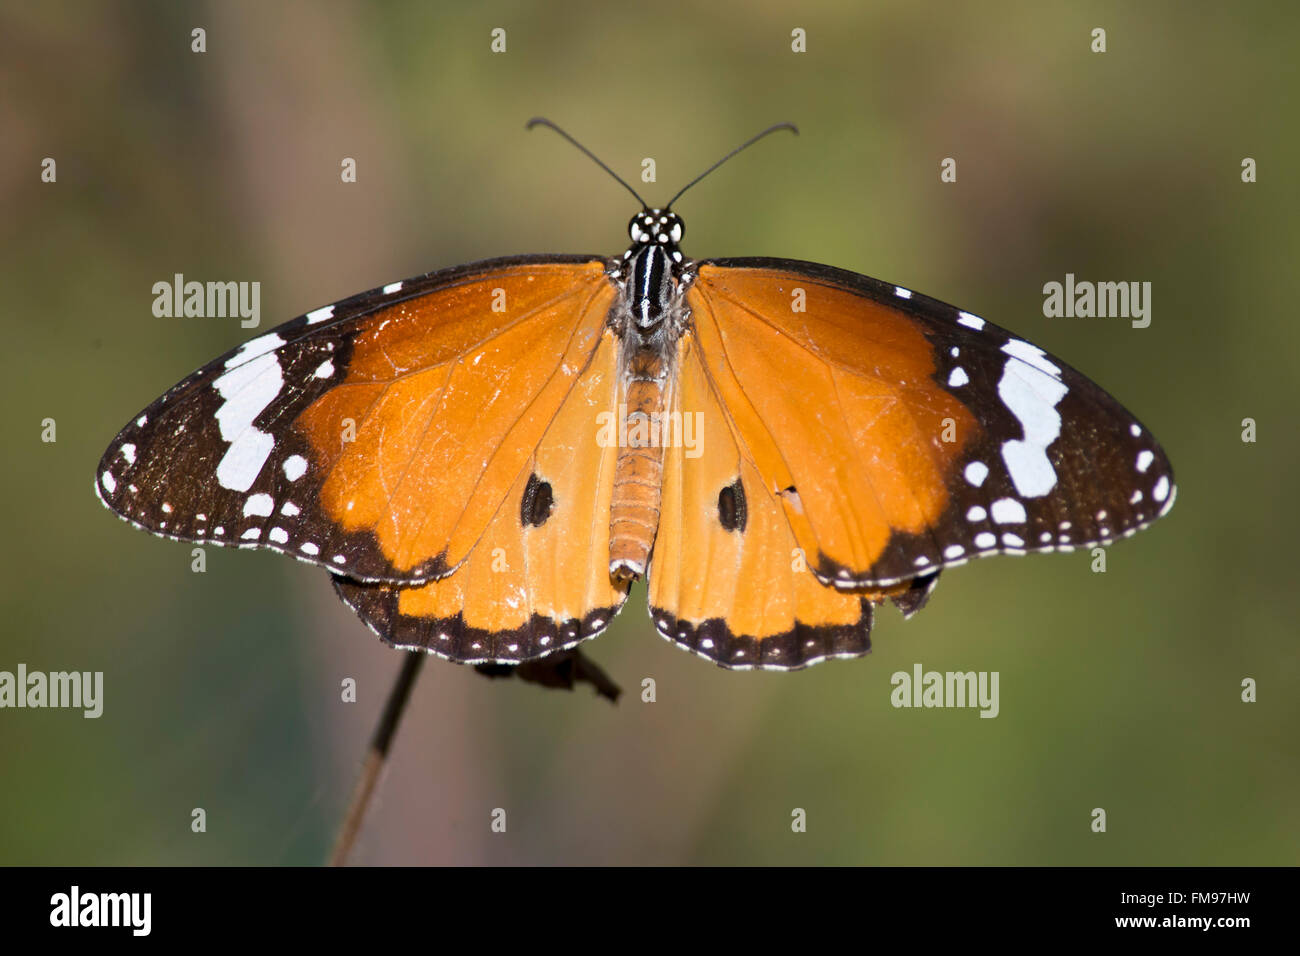 Orange butterfly on a leaf in Kanha National Park, India. Stock Photo